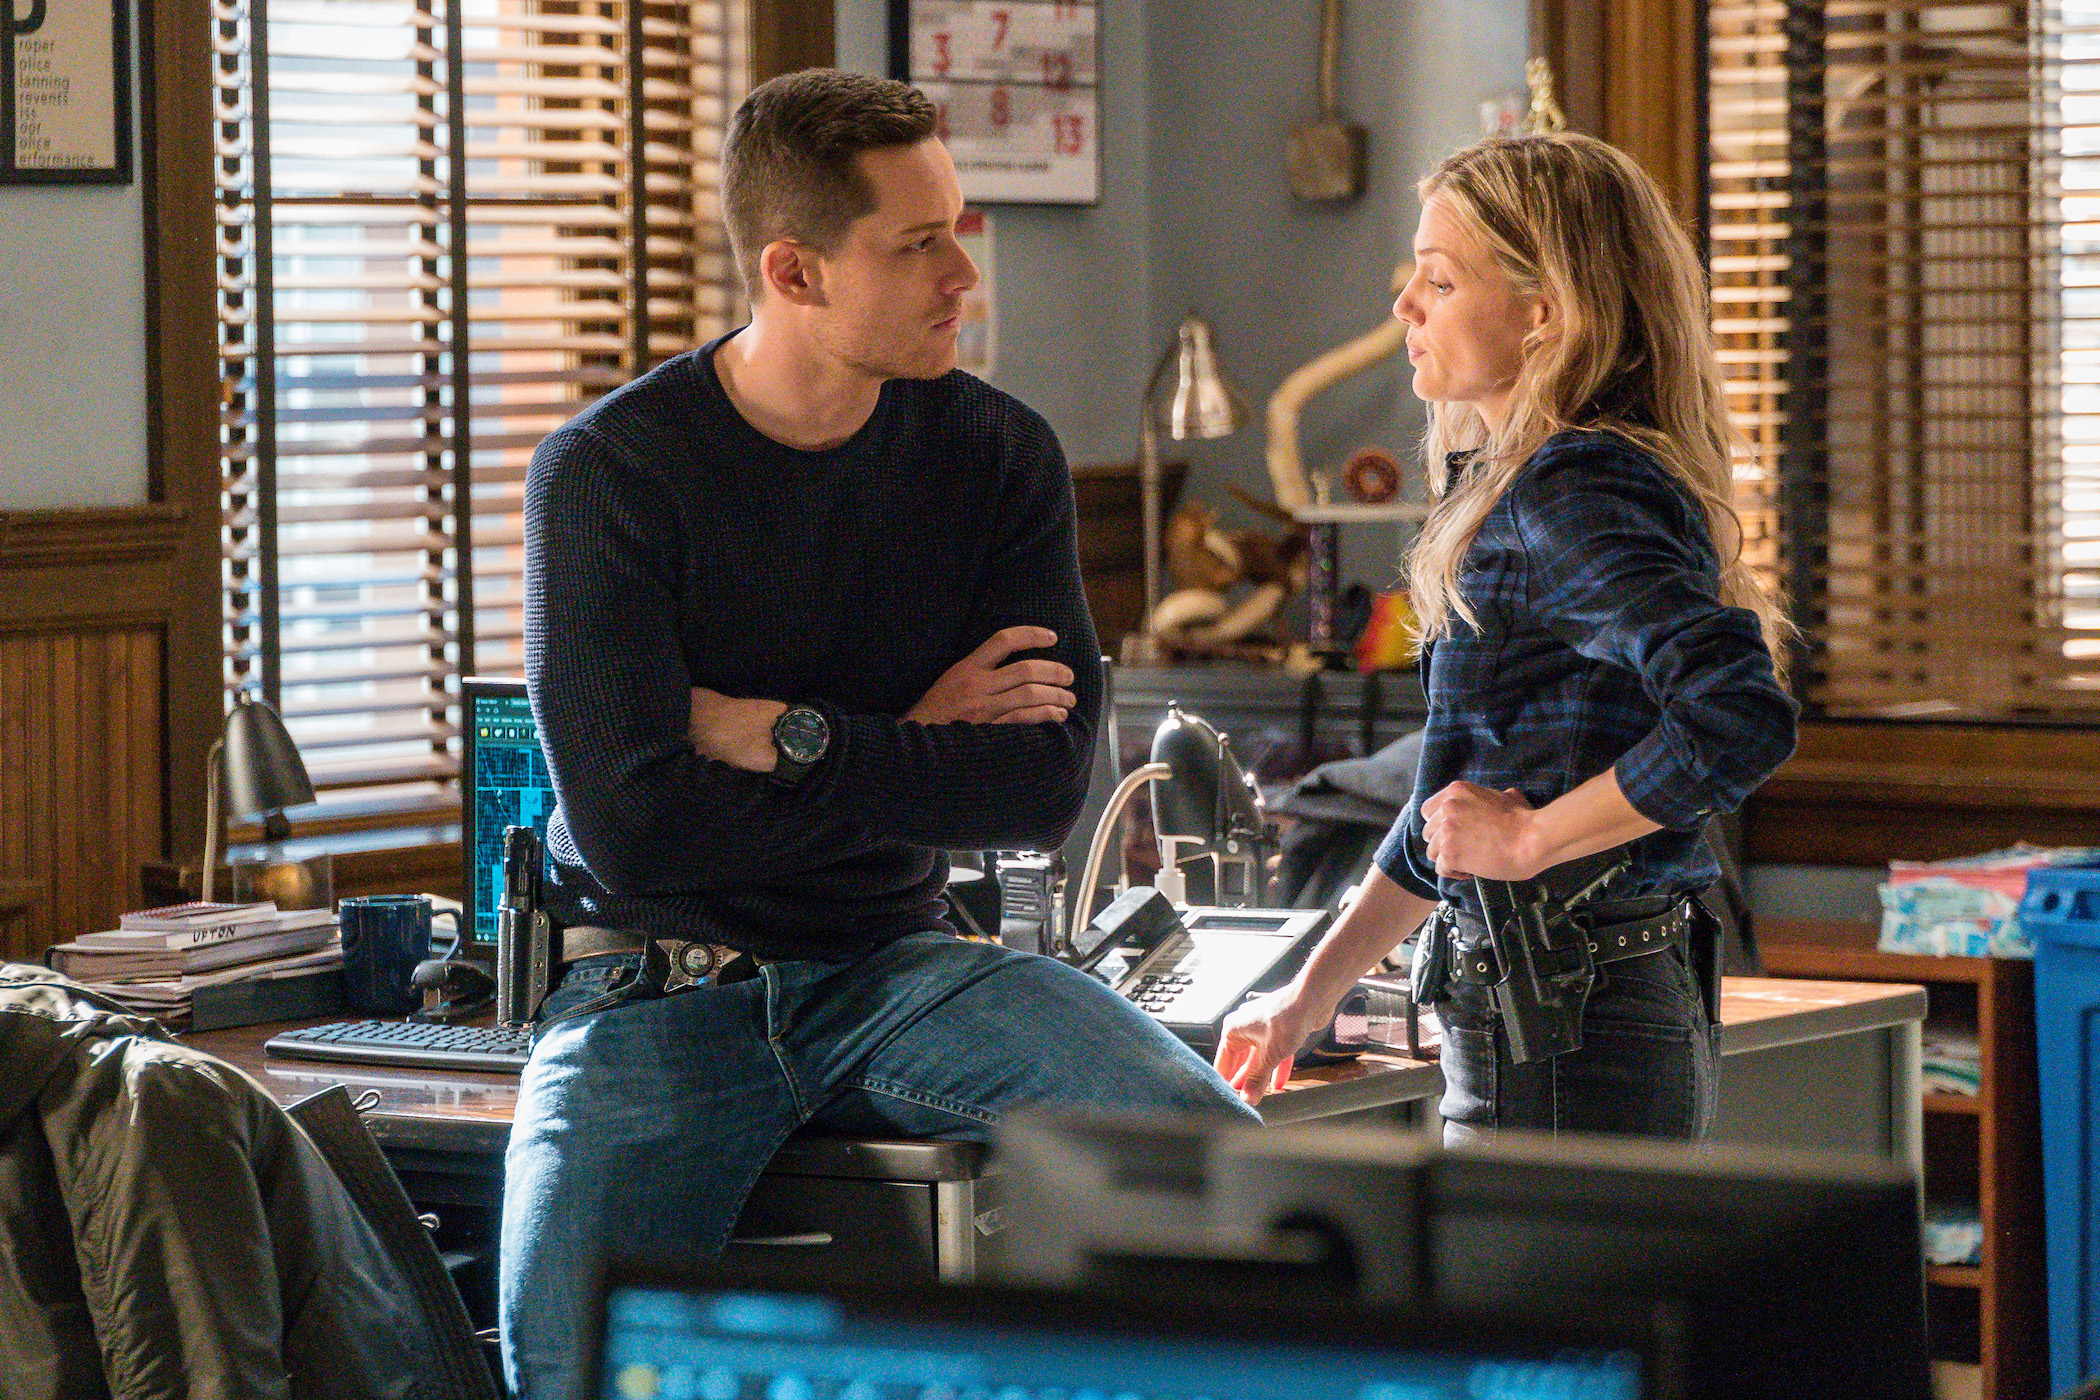 Jay Halstead and Hailey Upton from 'Chicago P.D.' Season 9 standing together and talking. 'Chicago P.D.' Season 9 spoilers note they get engaged